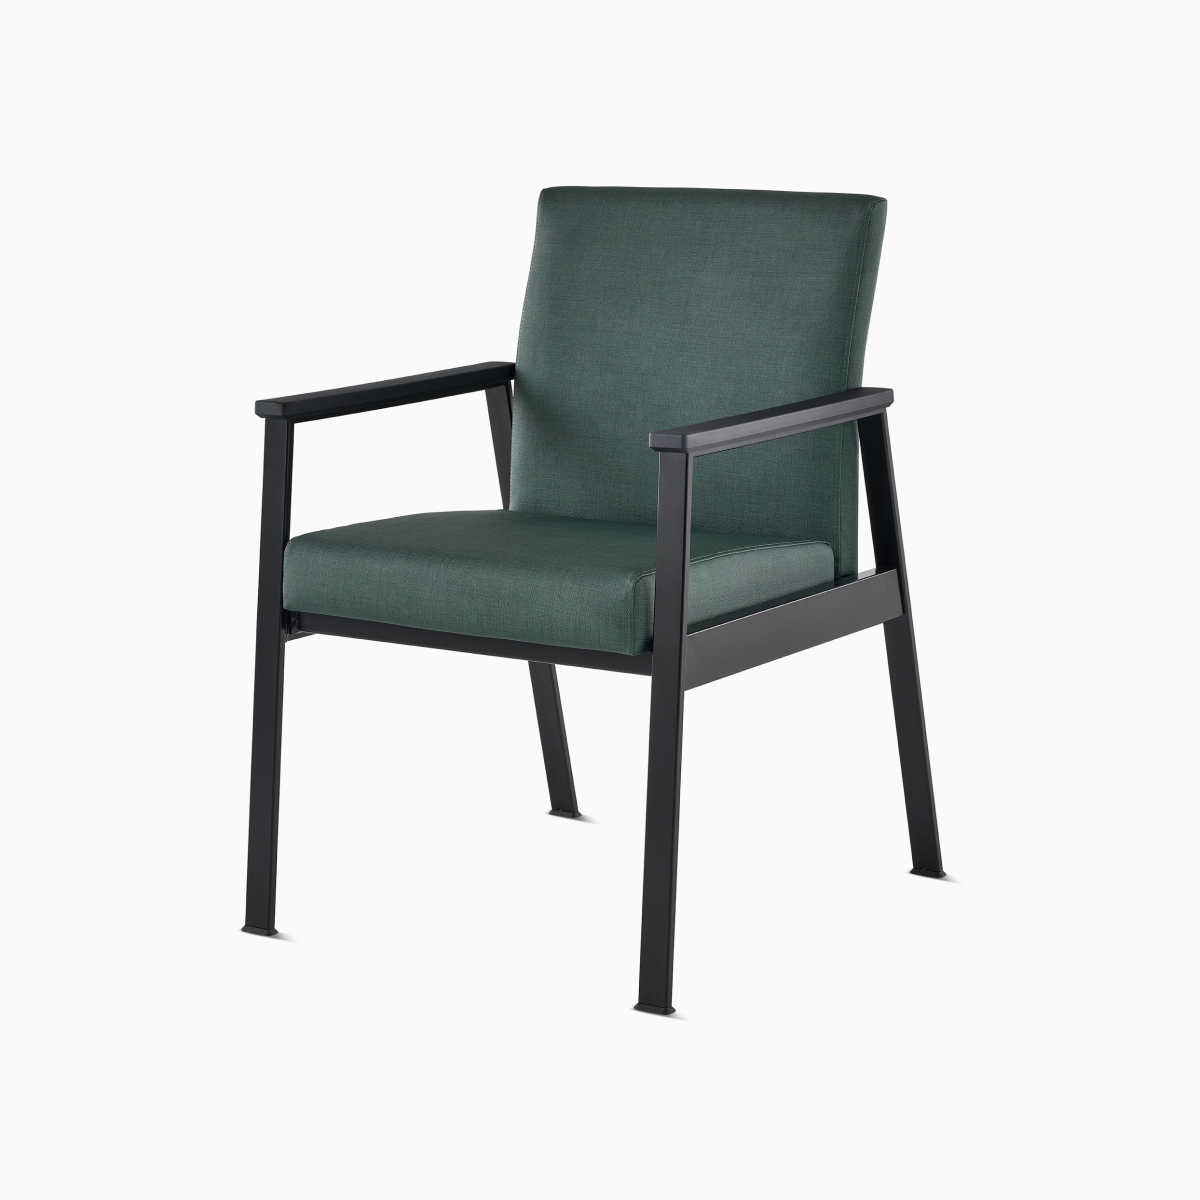 Front-angle view of an Easton Side Chair with green upholstery, black four-leg base, and black arm caps.